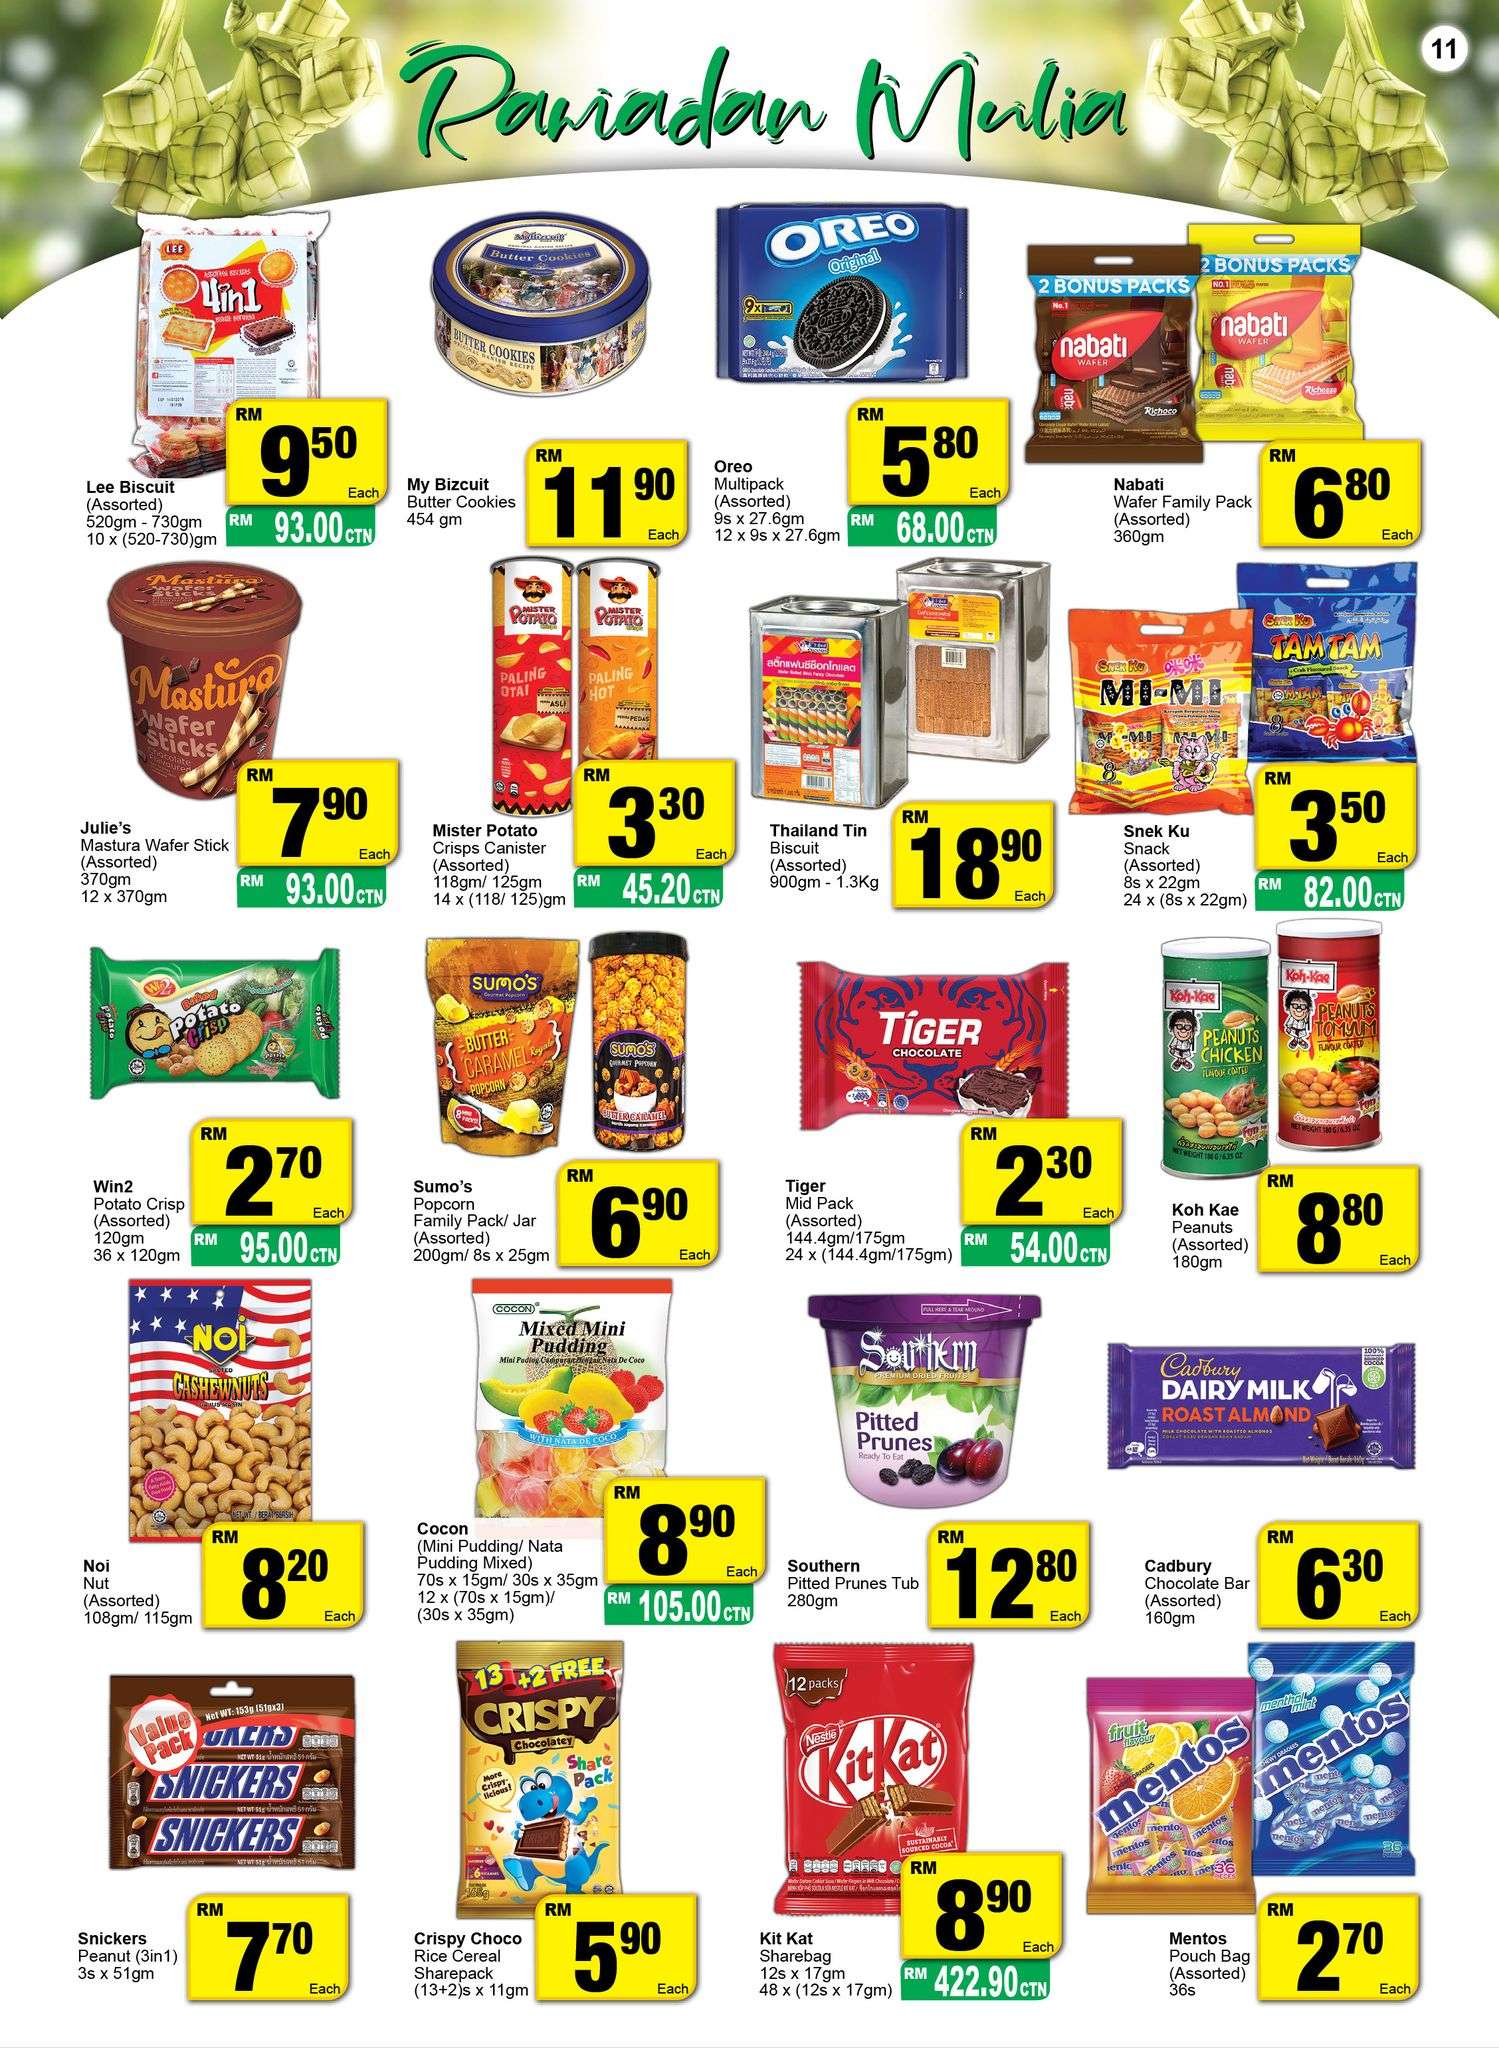 EconSave Catalogue (15 March - 26 March 2024)